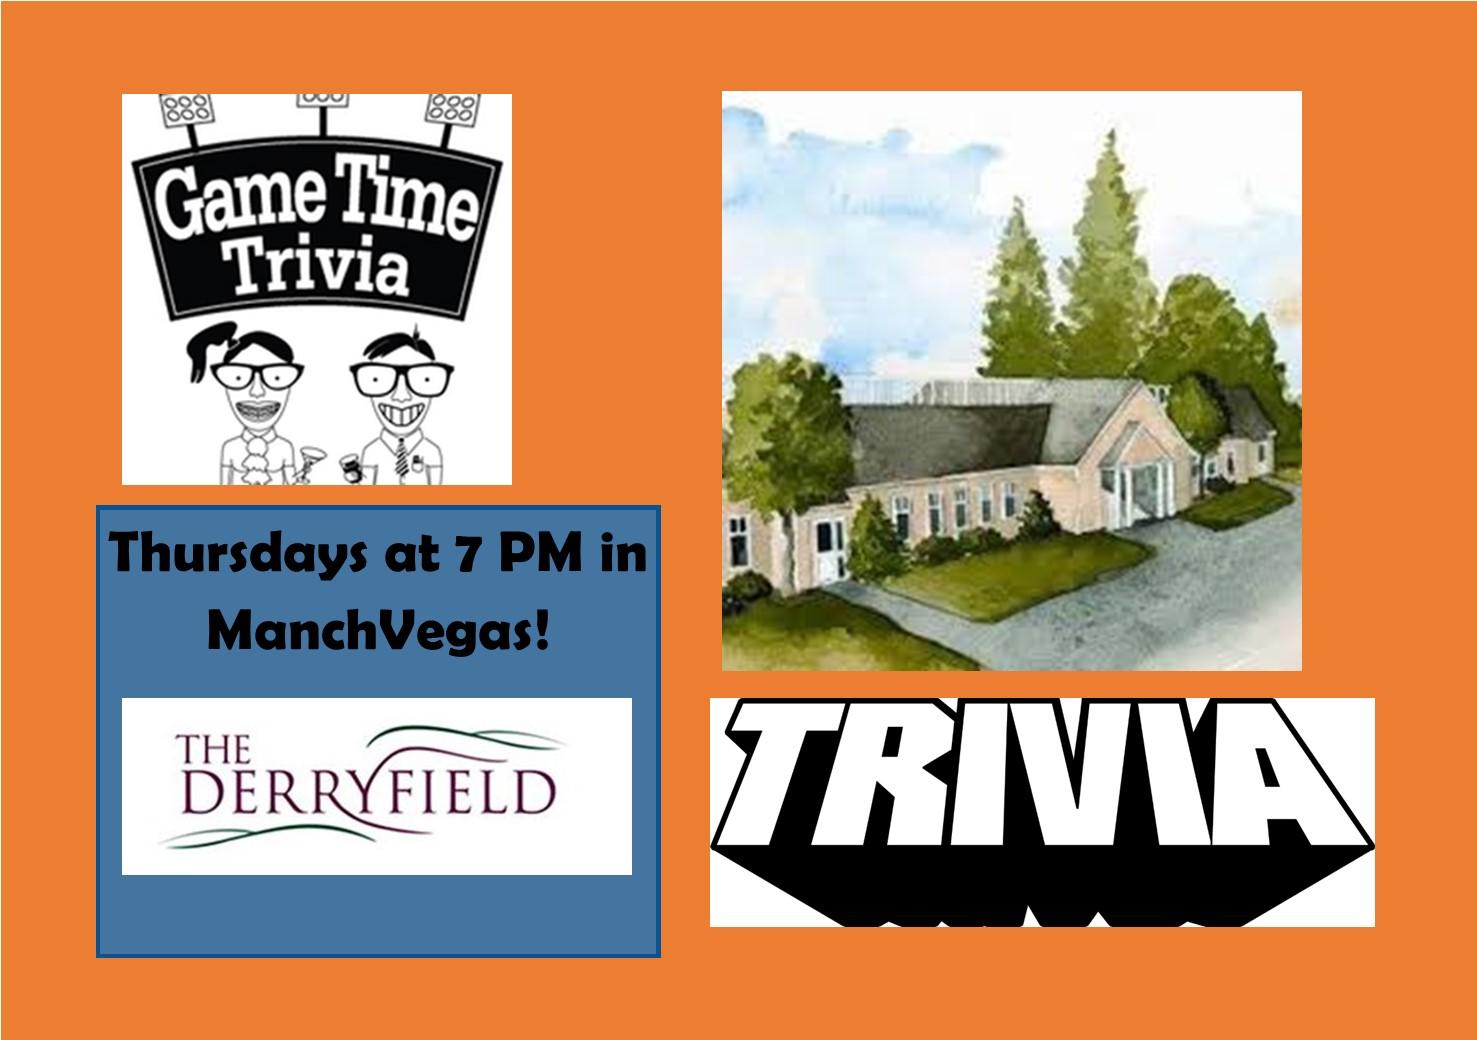 Game Time Trivia at the Derryfield Restaurant Lounge